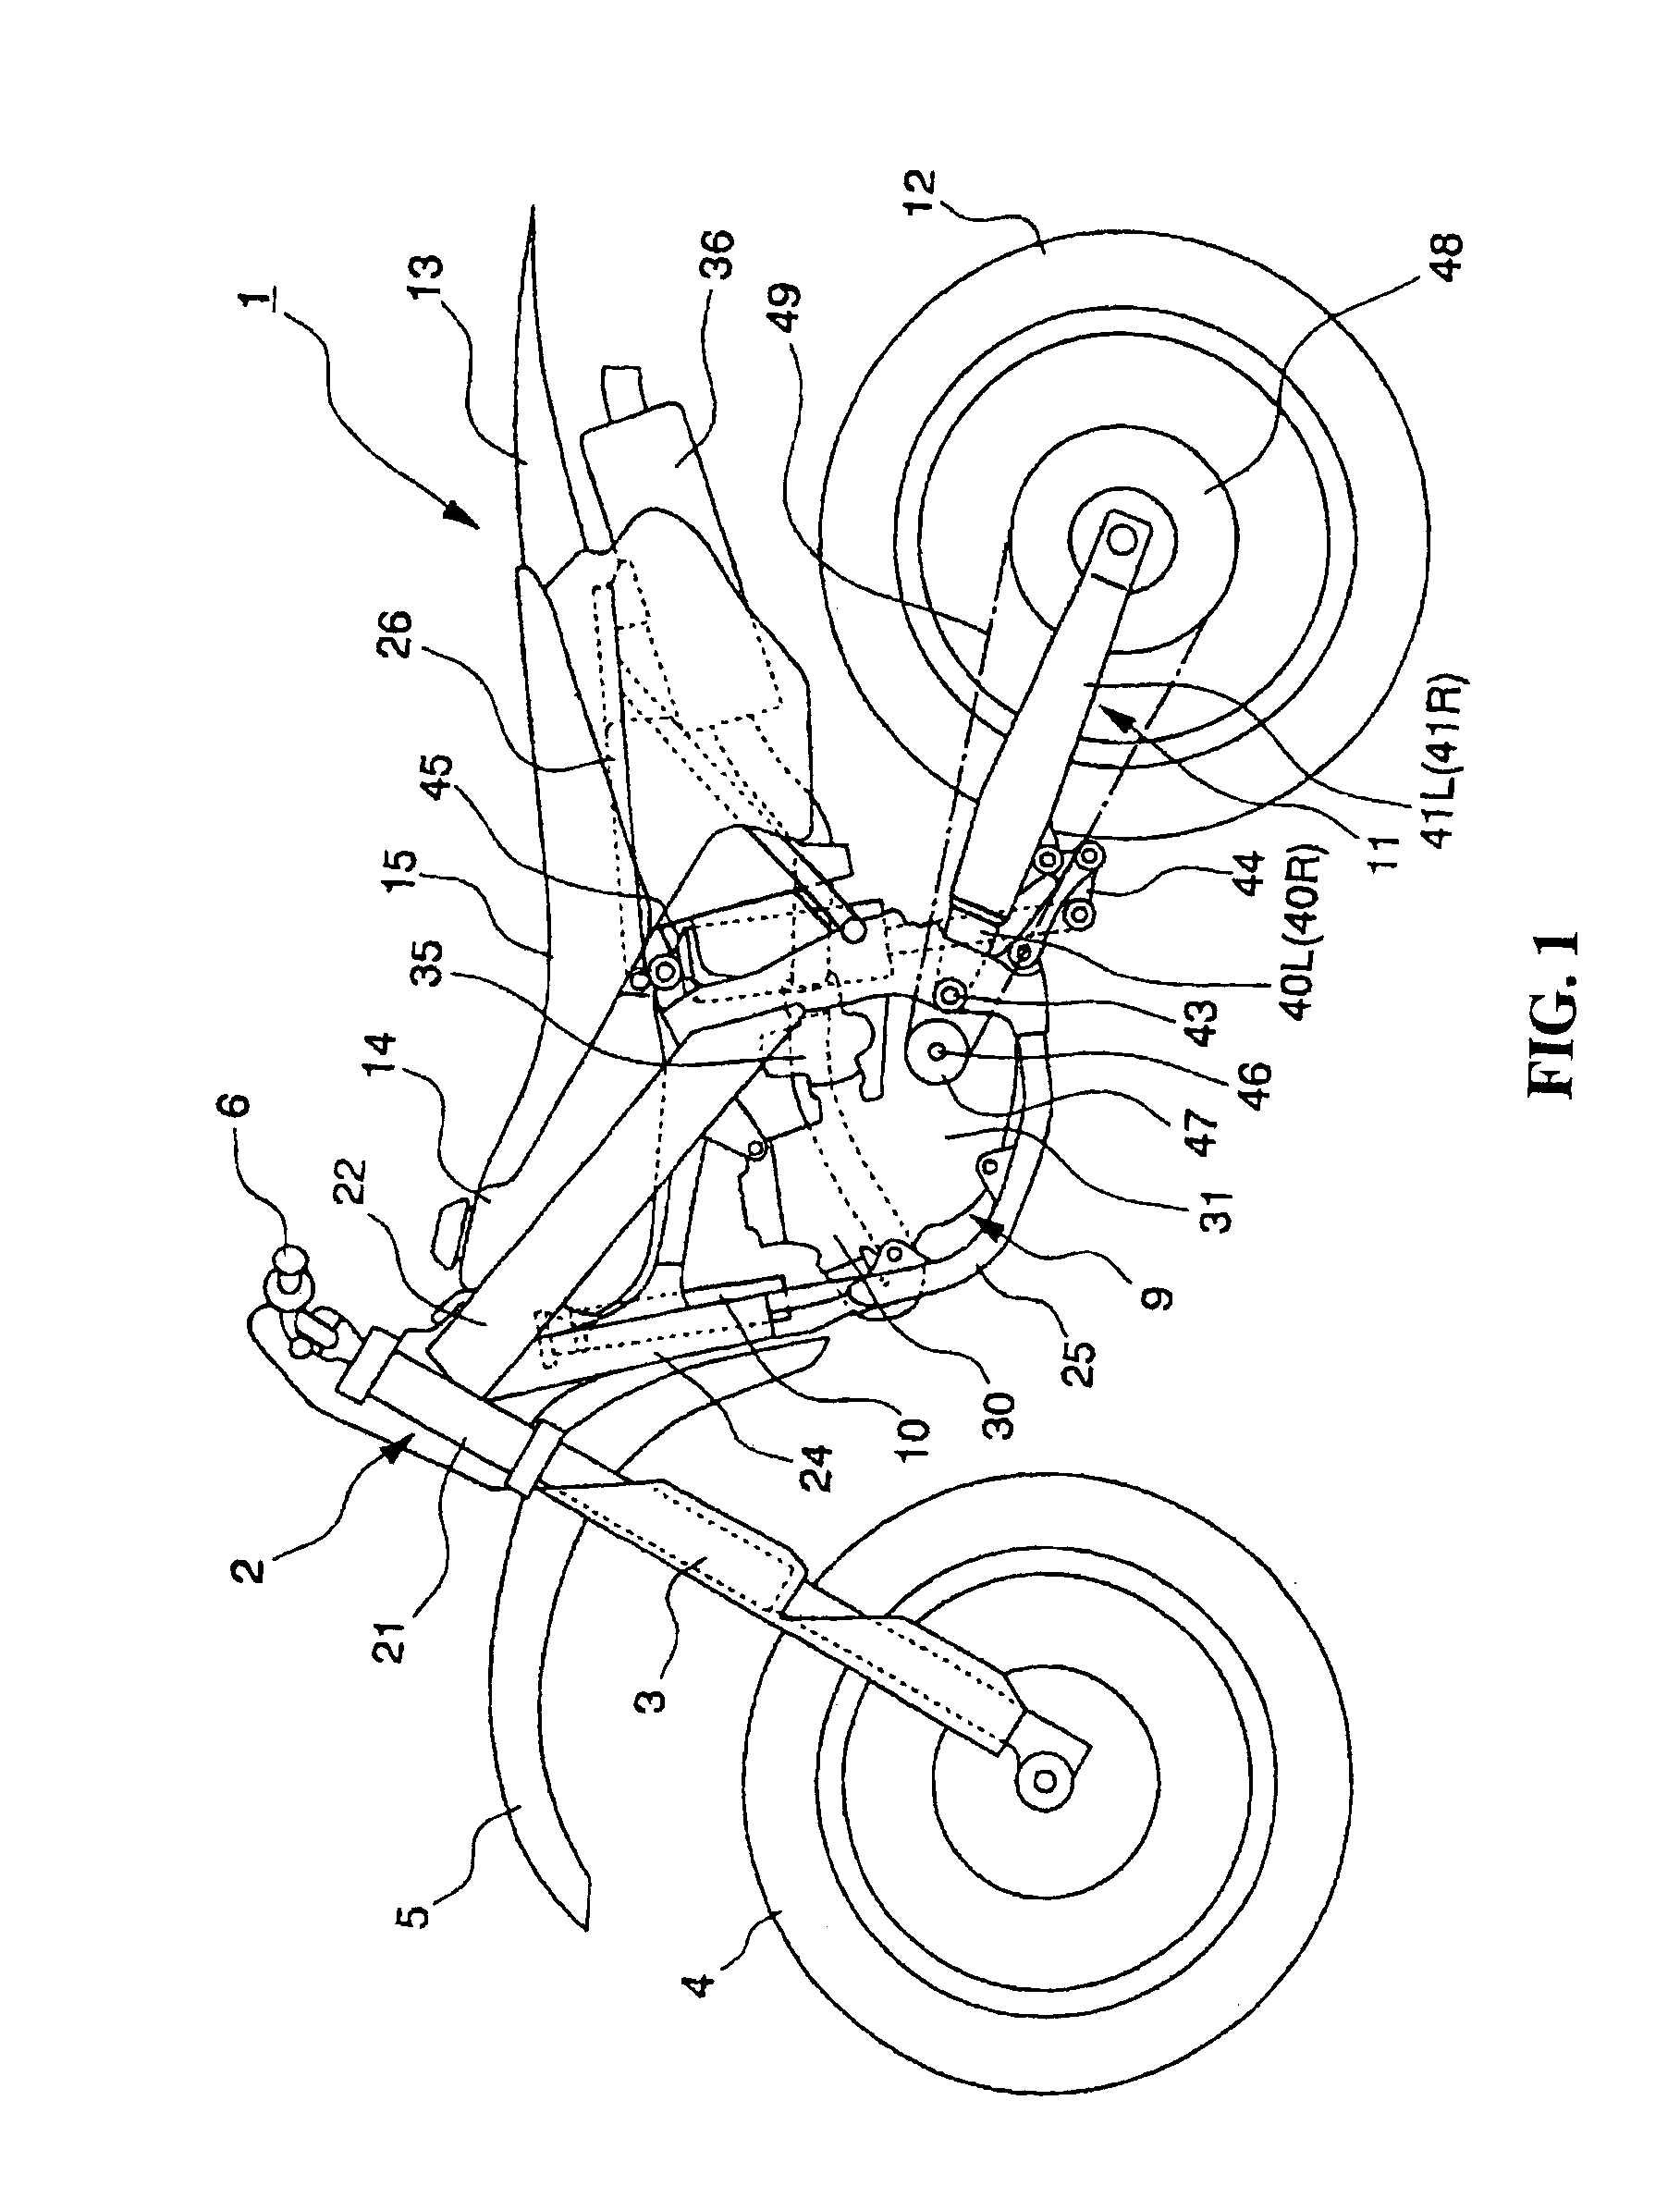 Structure of mounting rear fork in vehicle such as motorcycle